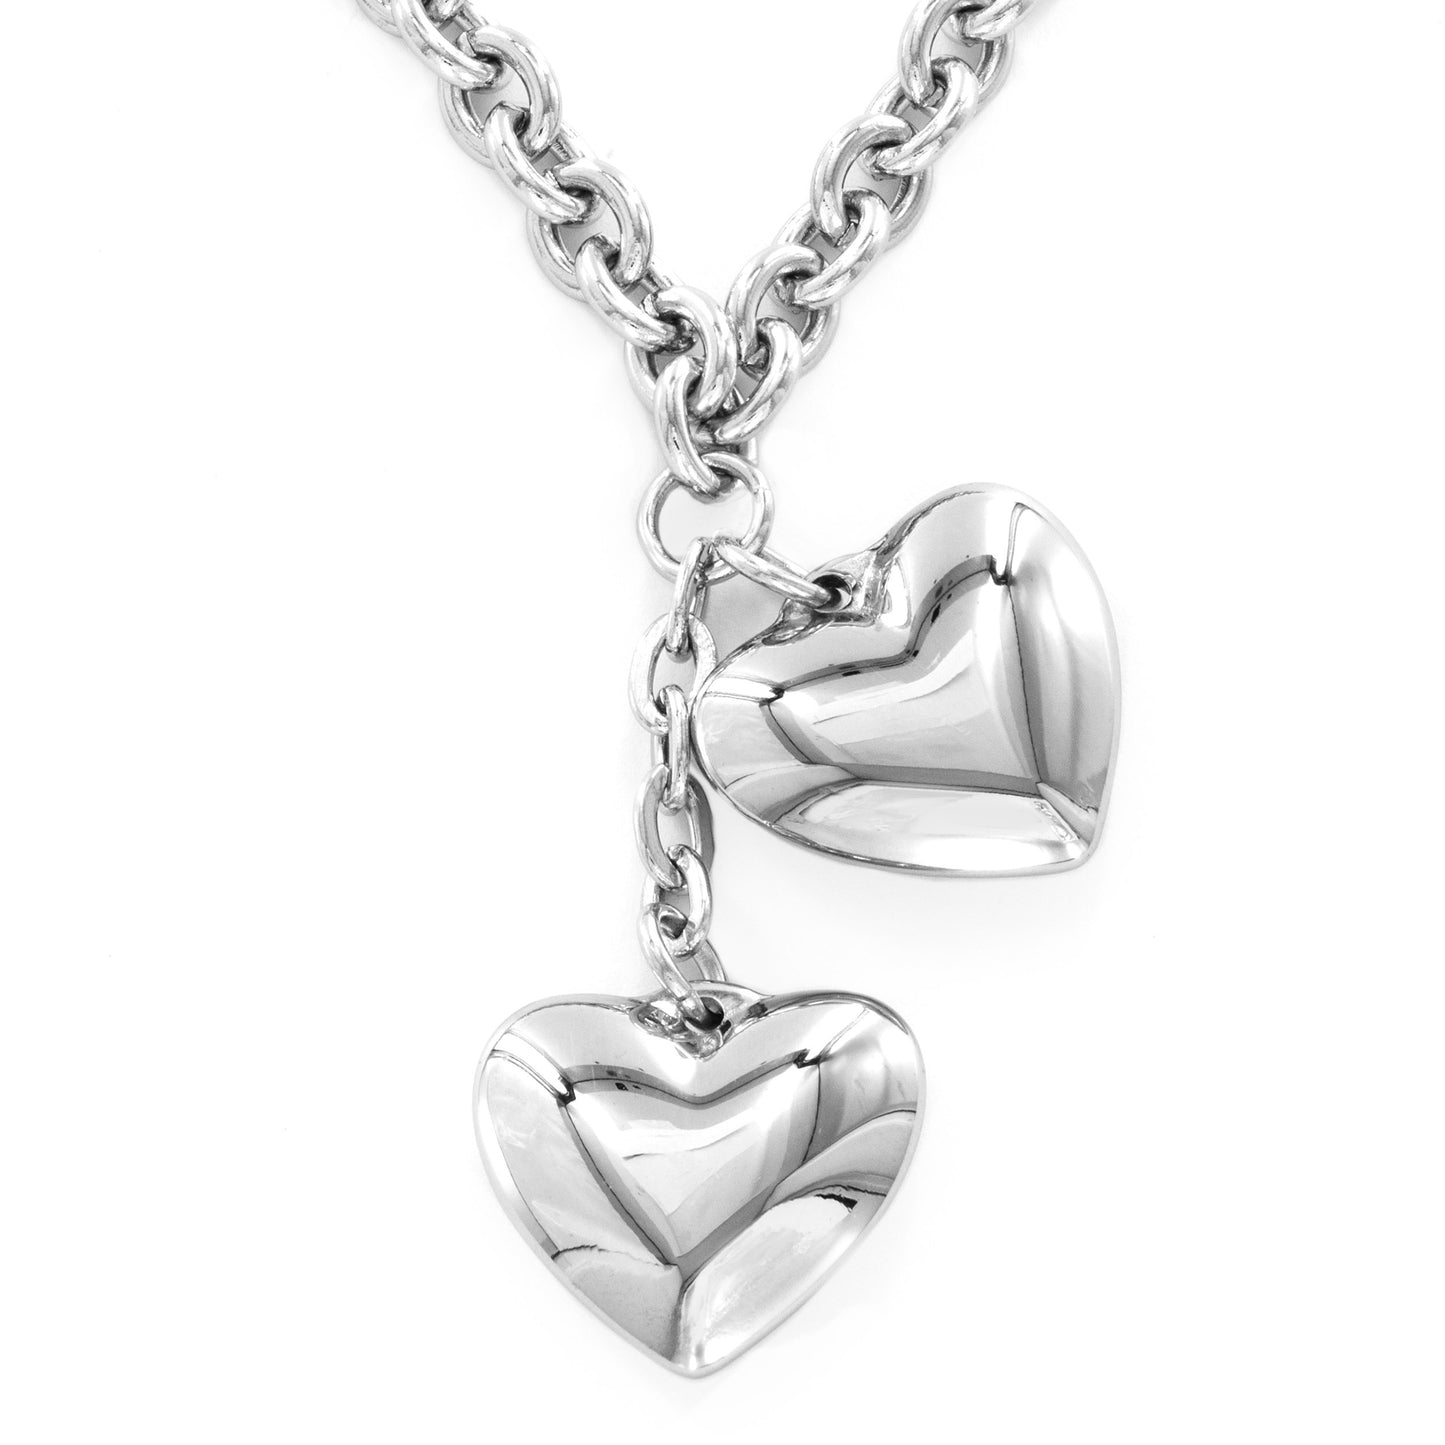 Women's Polished Dangling Puffed Hearts Stainless Steel Bracelet and Necklace Set